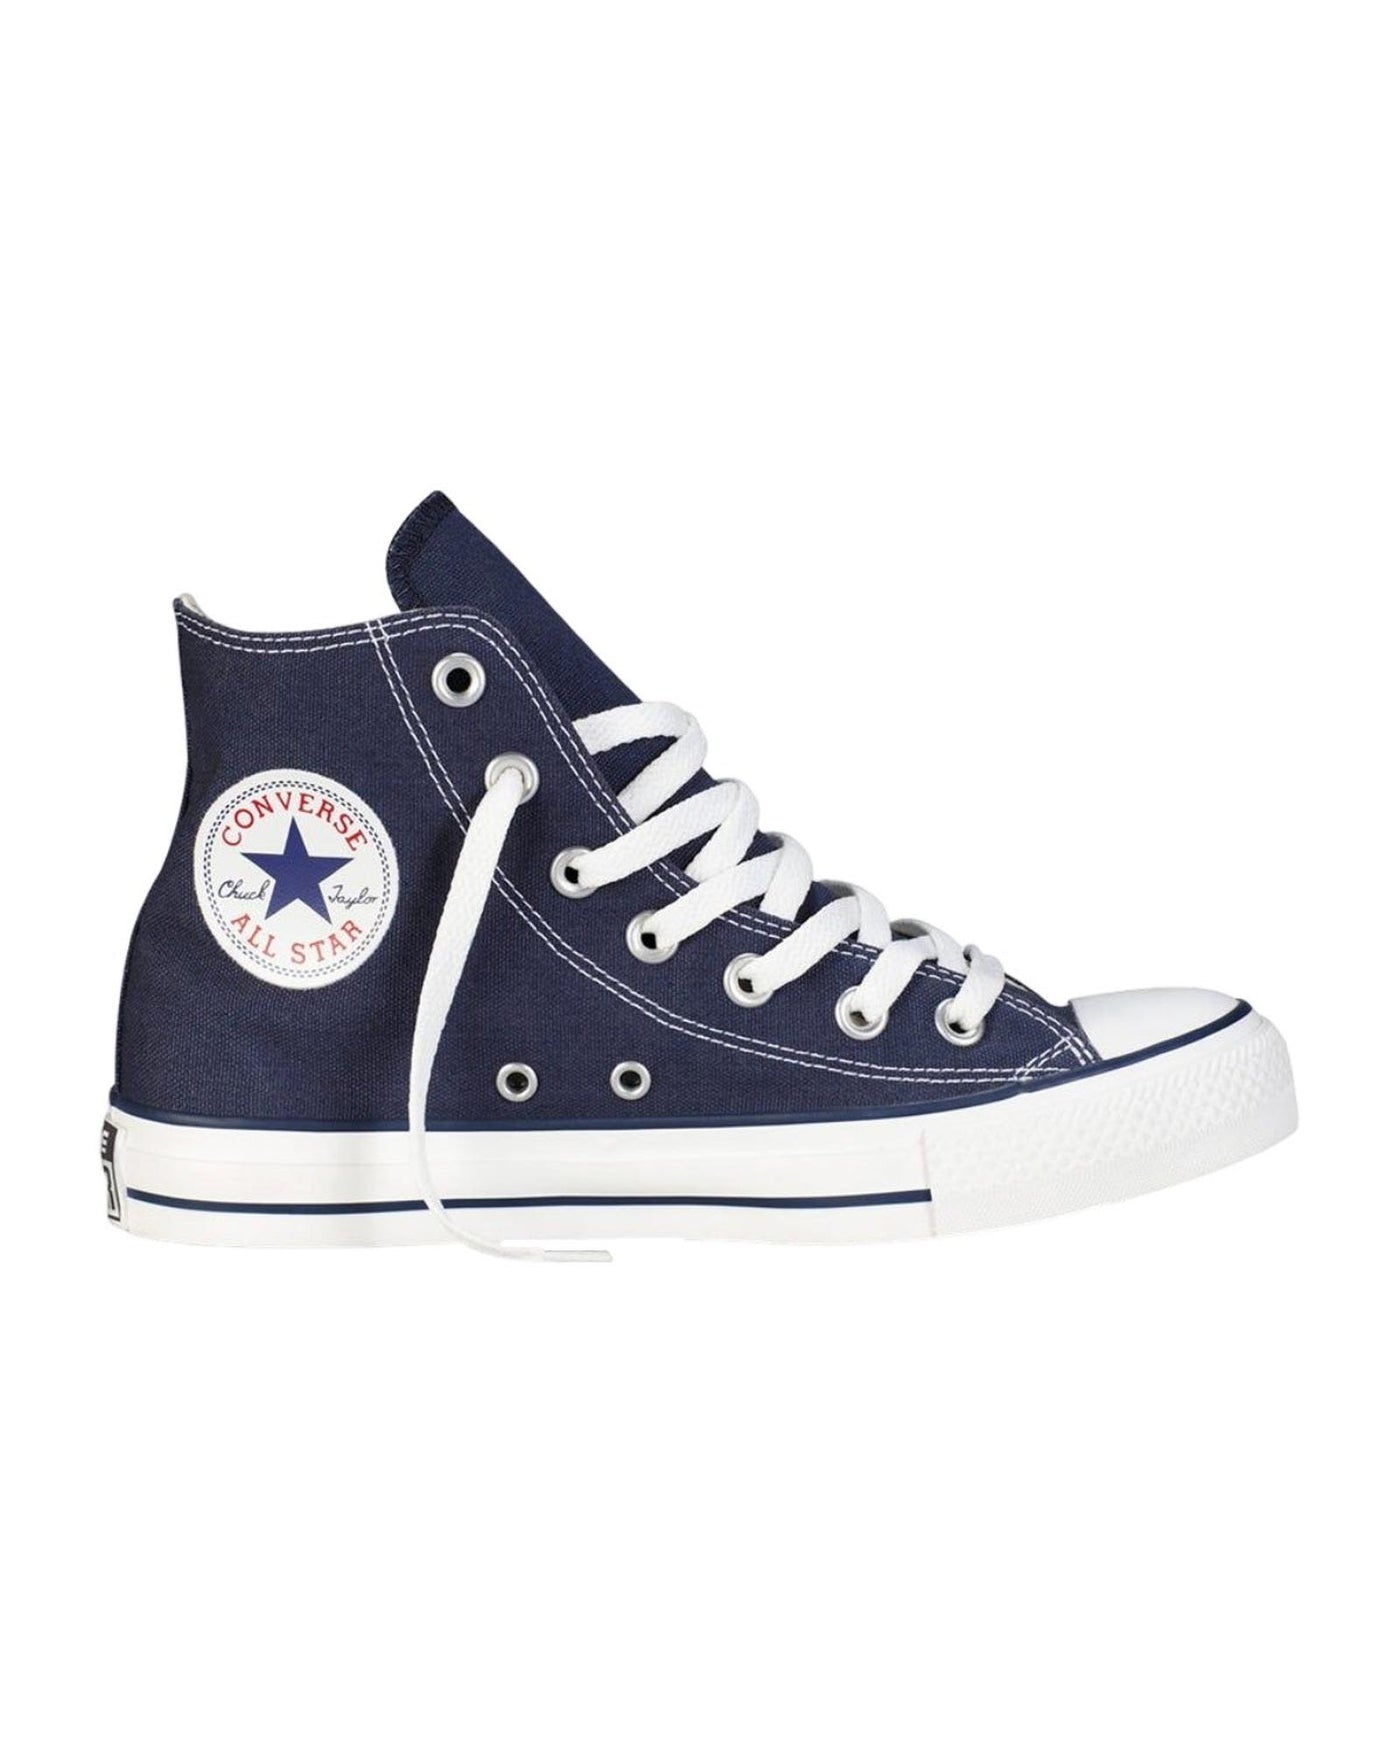 Classic Canvas High-Top Sneaker - 8 US